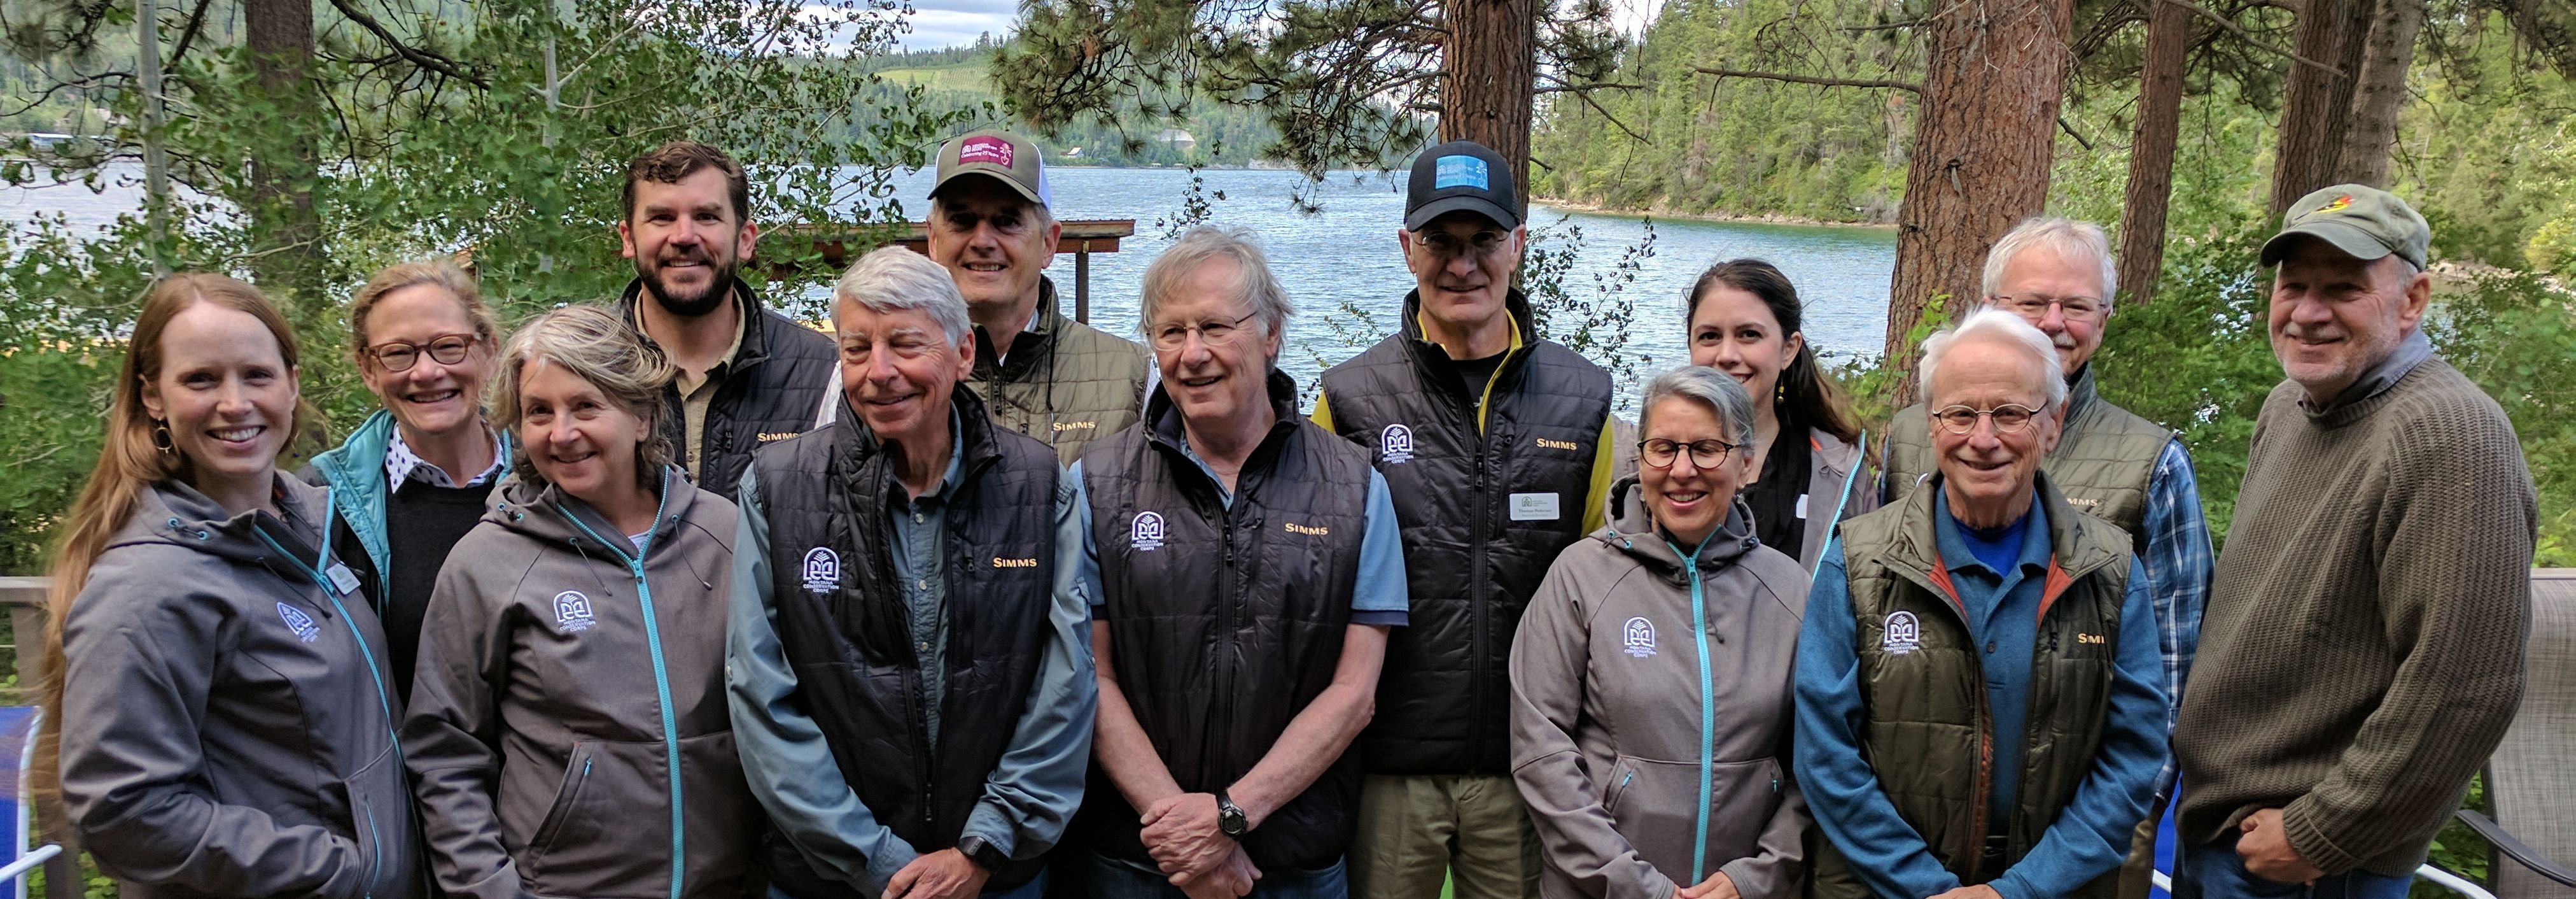 [Image Description: Thirteen members of the Board of Directors standing together on an overlook, wearing their MCC jackets and vests. Behind them is a bright blue lake surrounded by trees.]